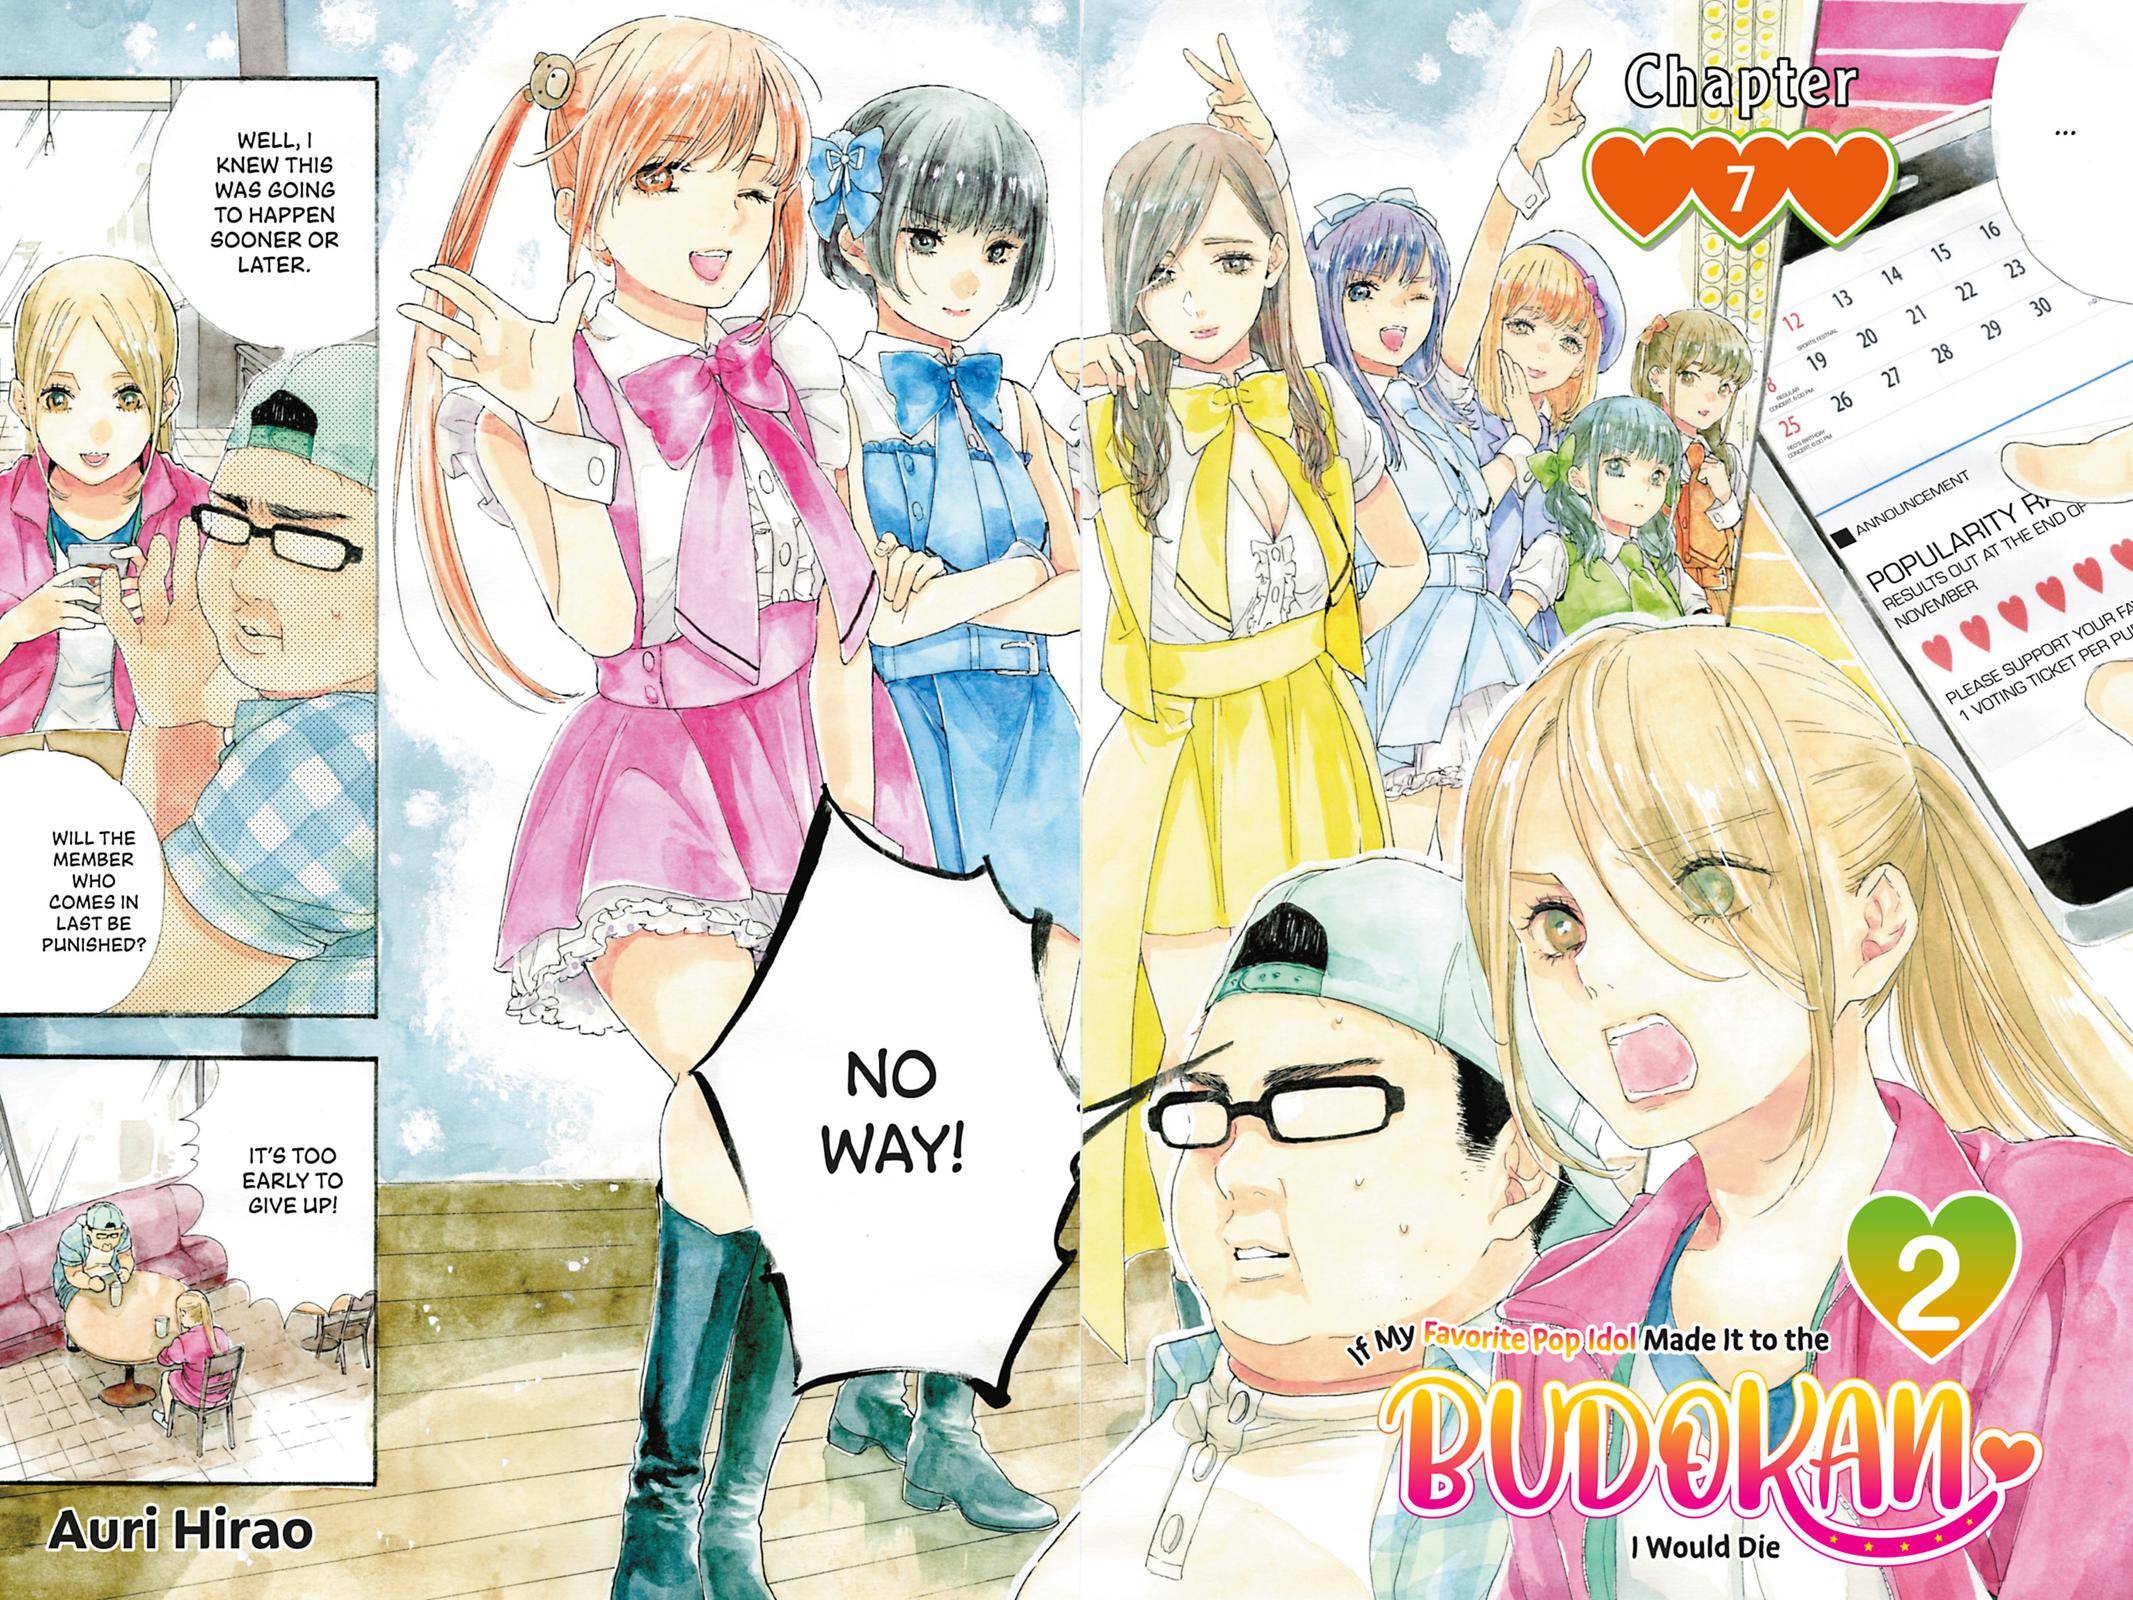 If My Favorite Pop Idol Made It to the Budokan, I Would Die - chapter 7 - #3